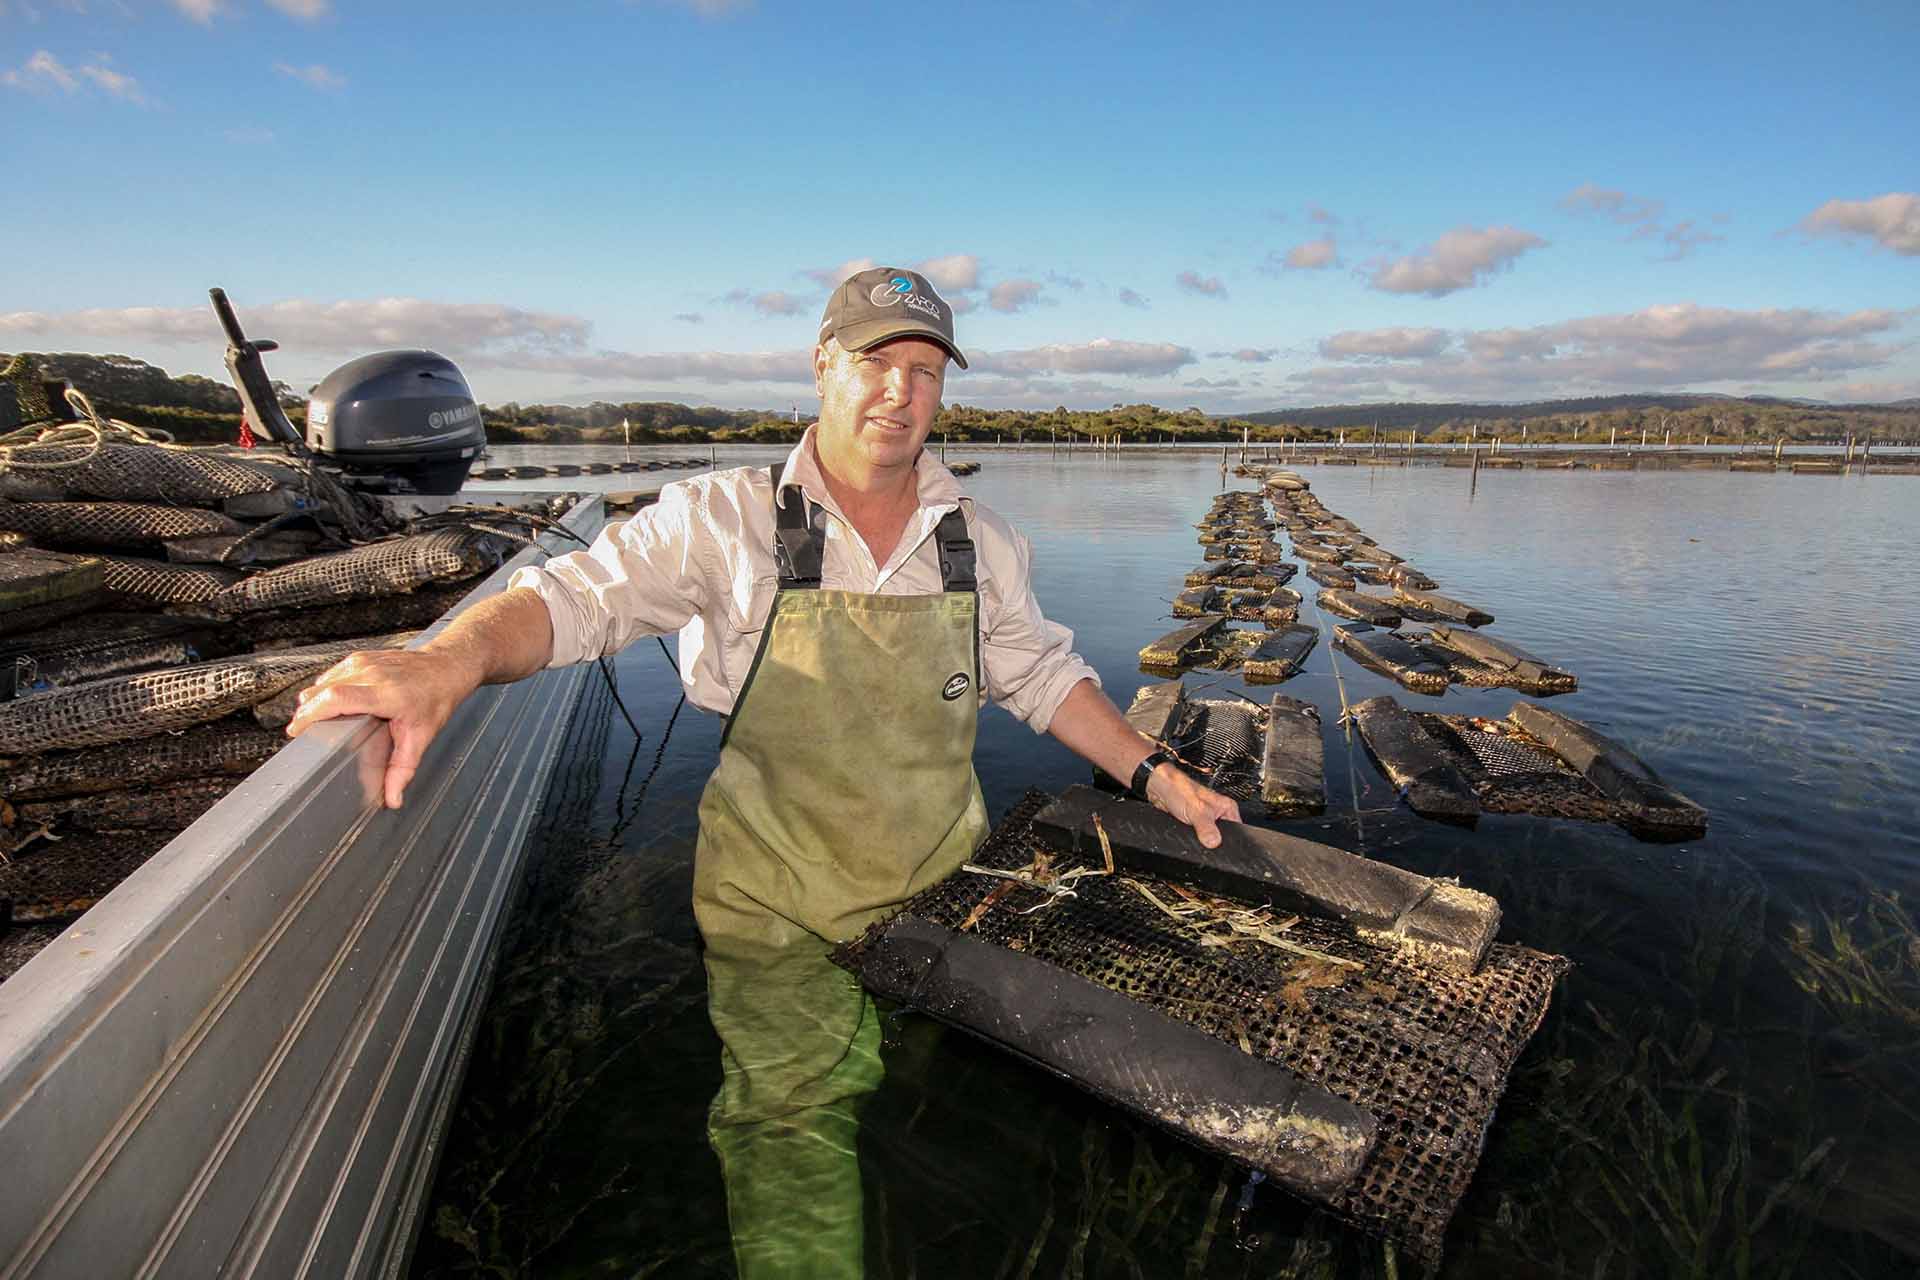 The Destination Agency, Sapphire Coast - Stirling Oysters - Tourism Marketing Project